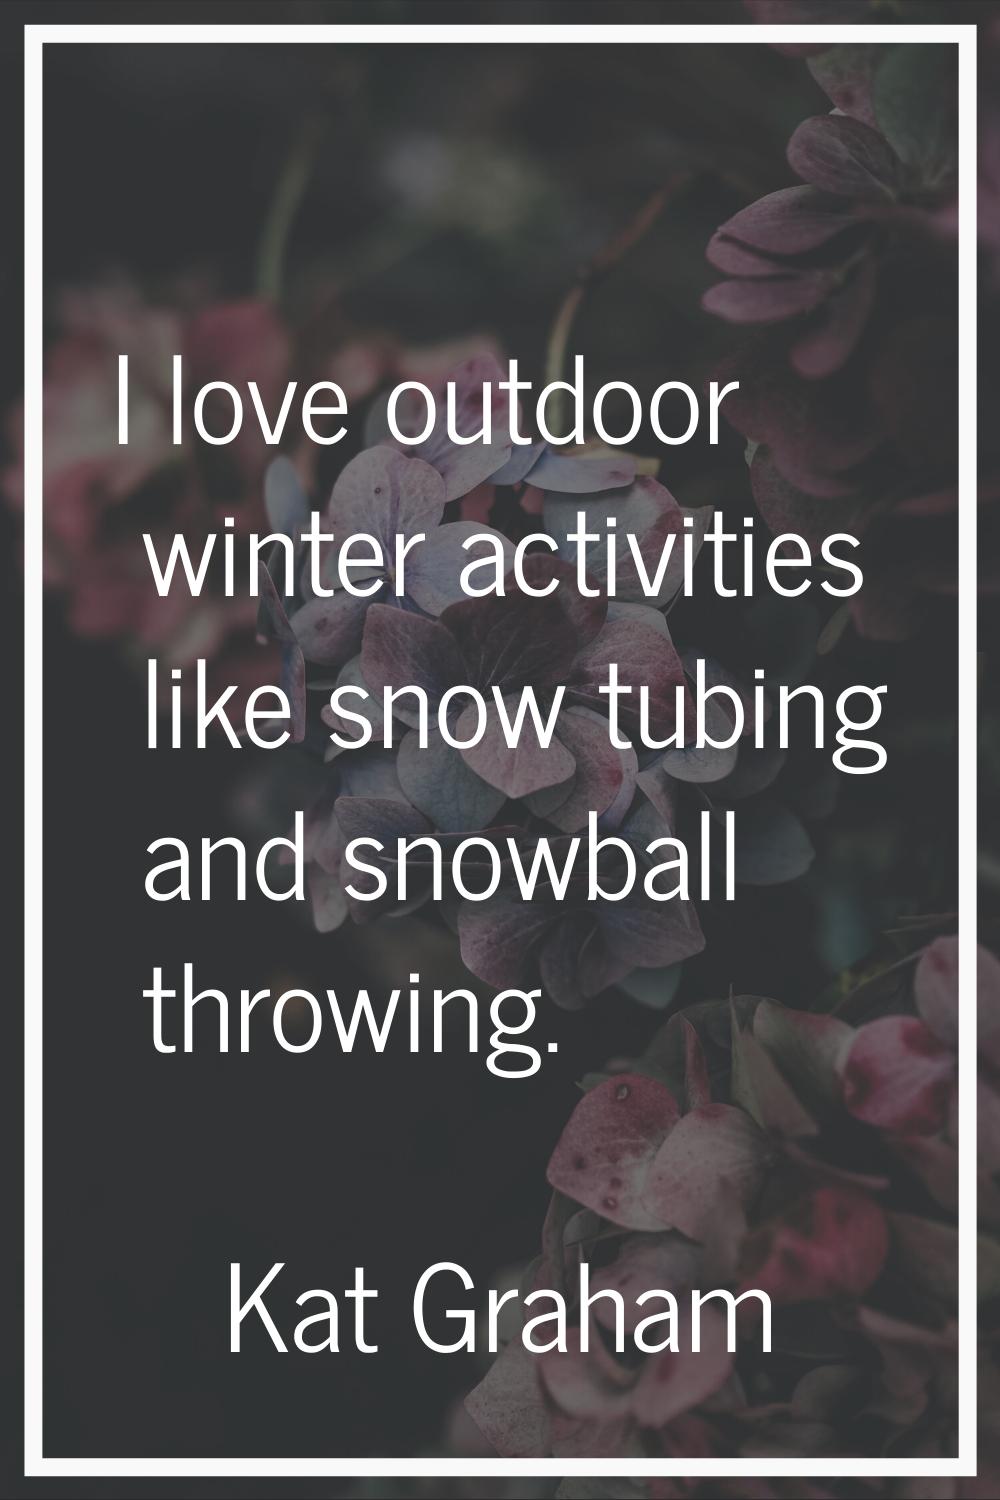 I love outdoor winter activities like snow tubing and snowball throwing.